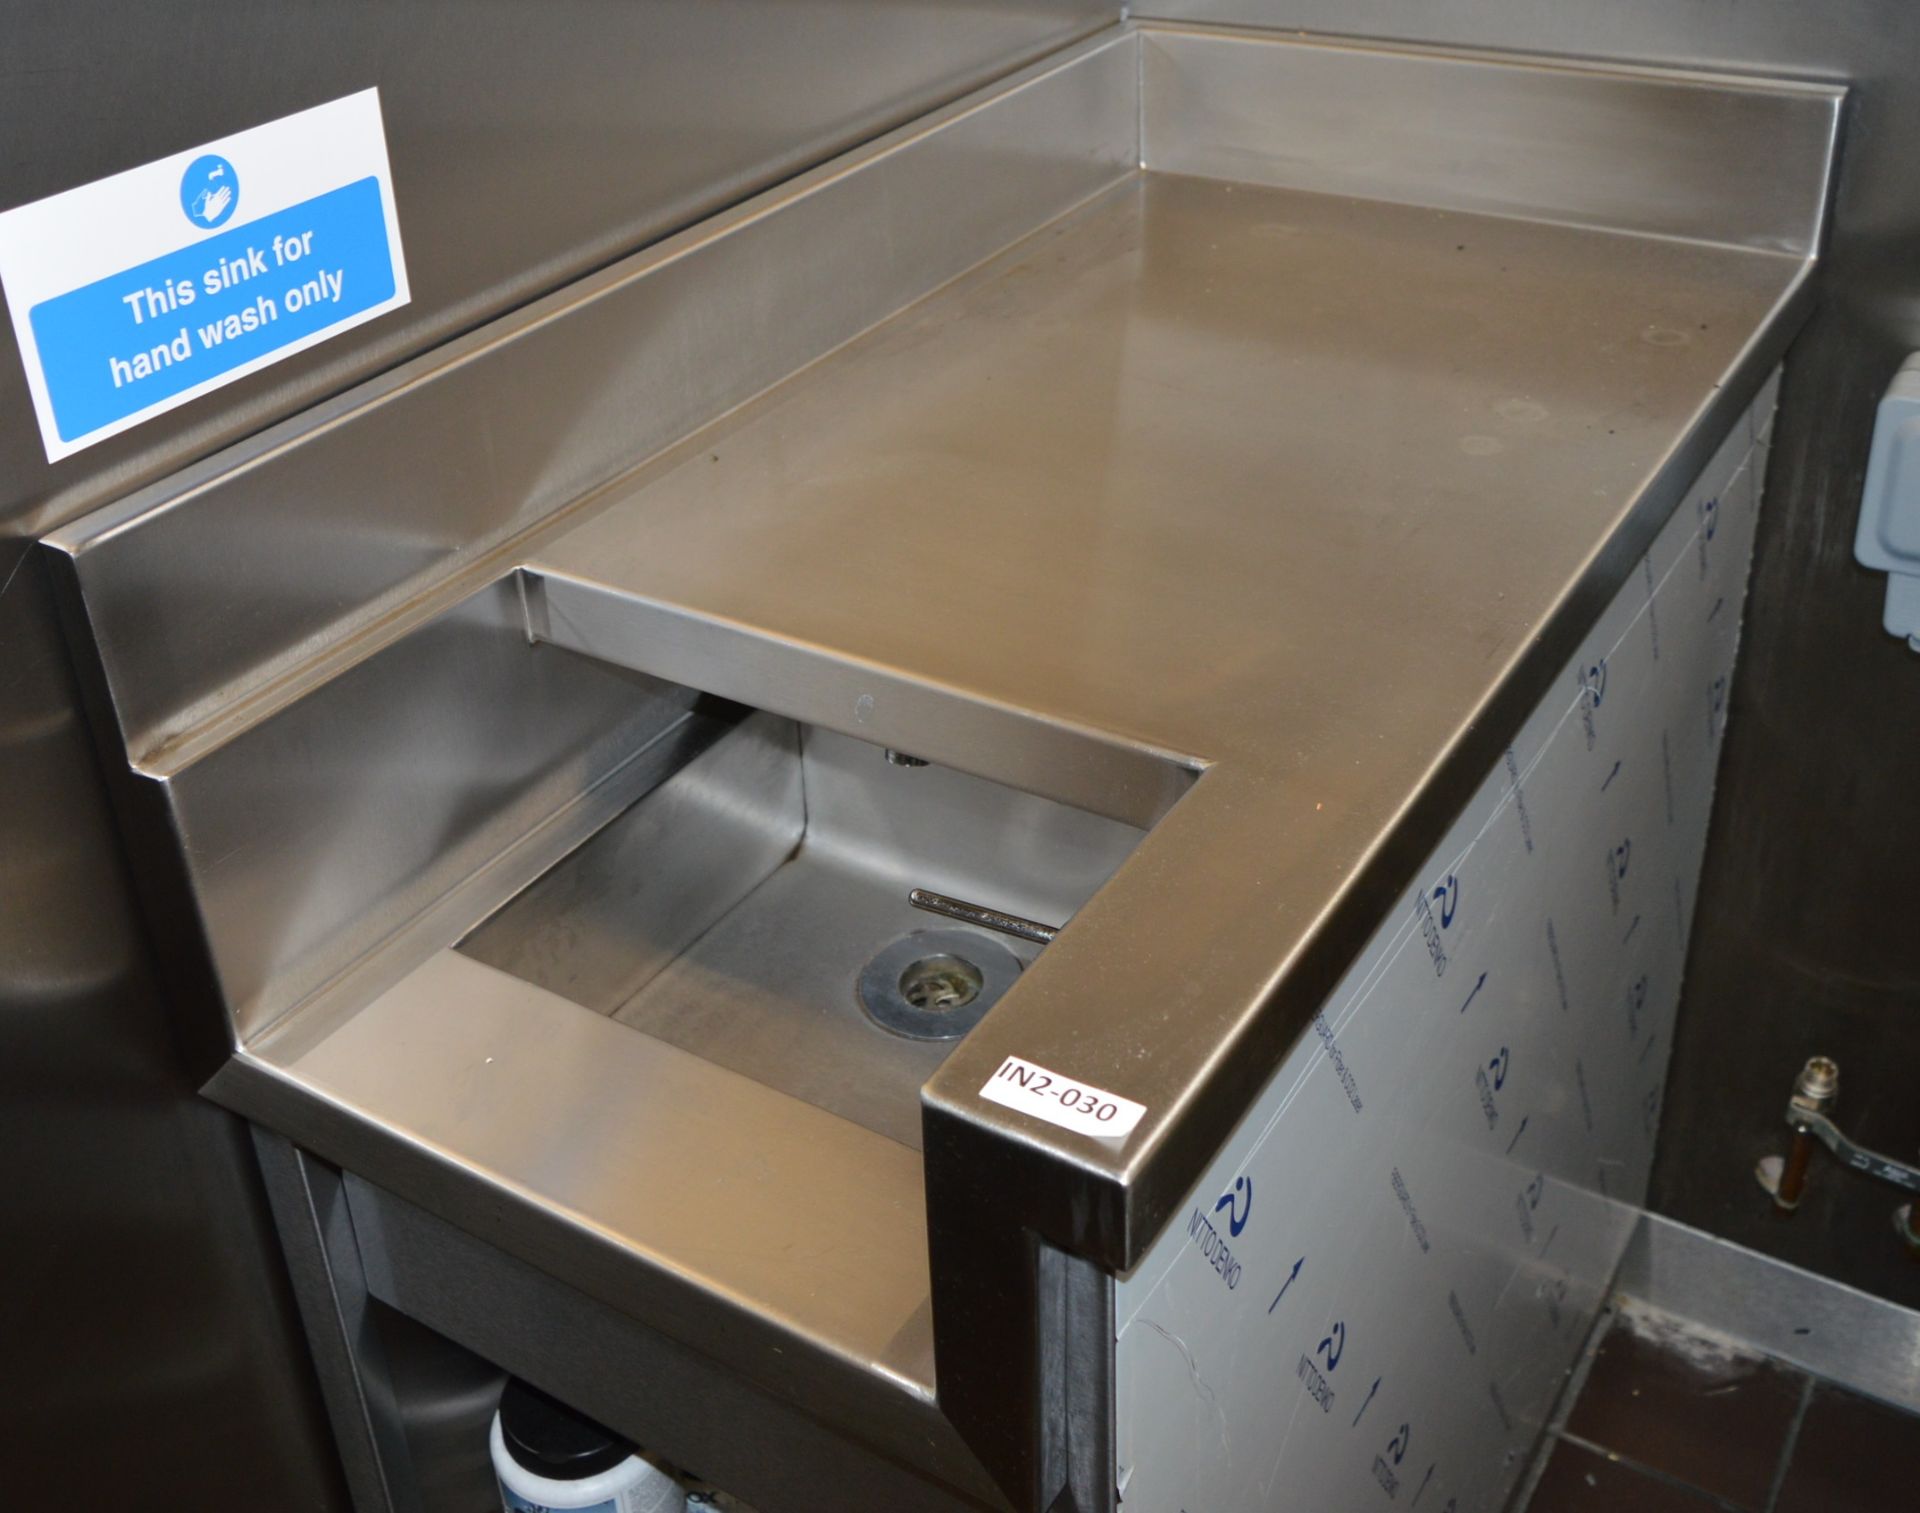 1 x Stainless Steel Hand Wash Prep Corner Unit - H91 x W48 x D90cms - CL350 - Ref 030 - Includes - Image 4 of 6